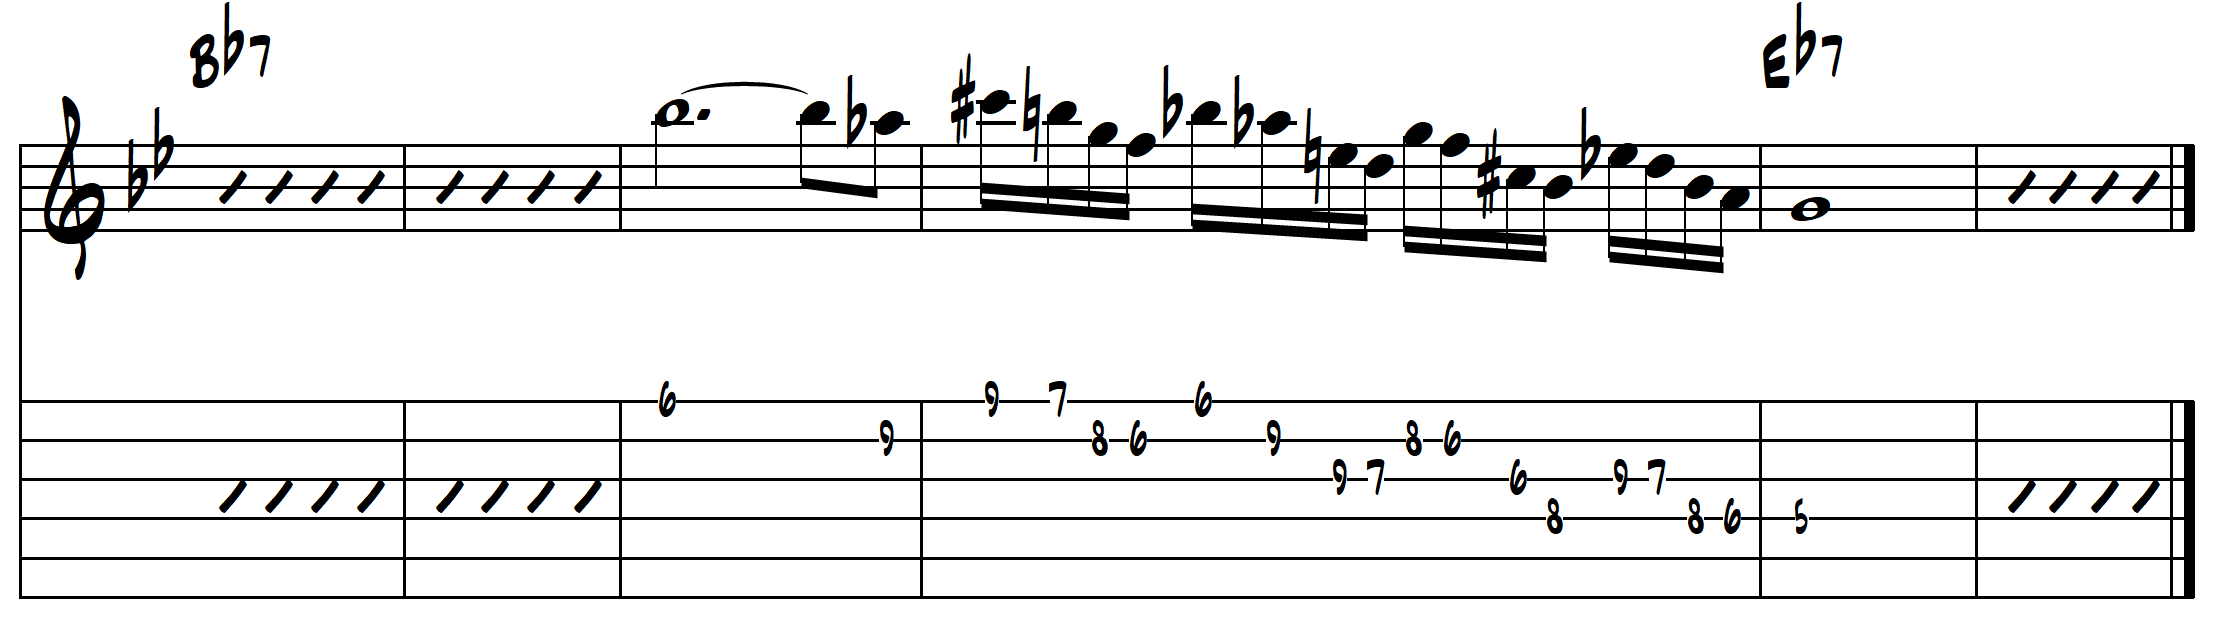 Putting the Coltrane Diminished patter to use for altered dominant chord notes